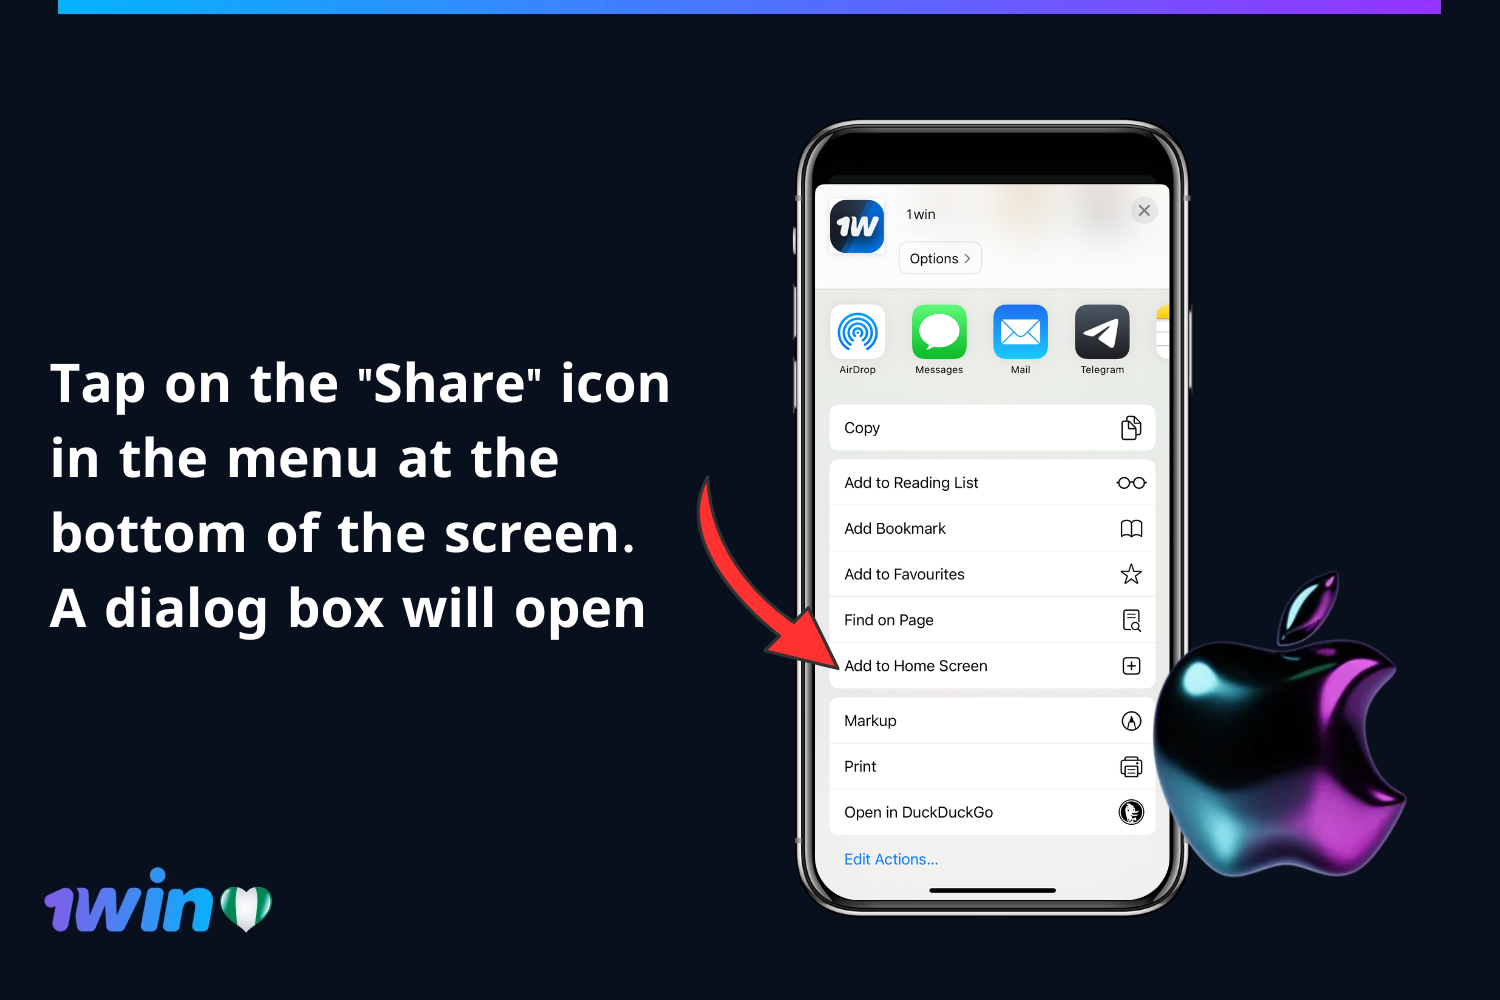 To download the application to iPhone, a user from Nigeria should click on the "Share" icon in the menu at the bottom of the screen and a dialog box will open